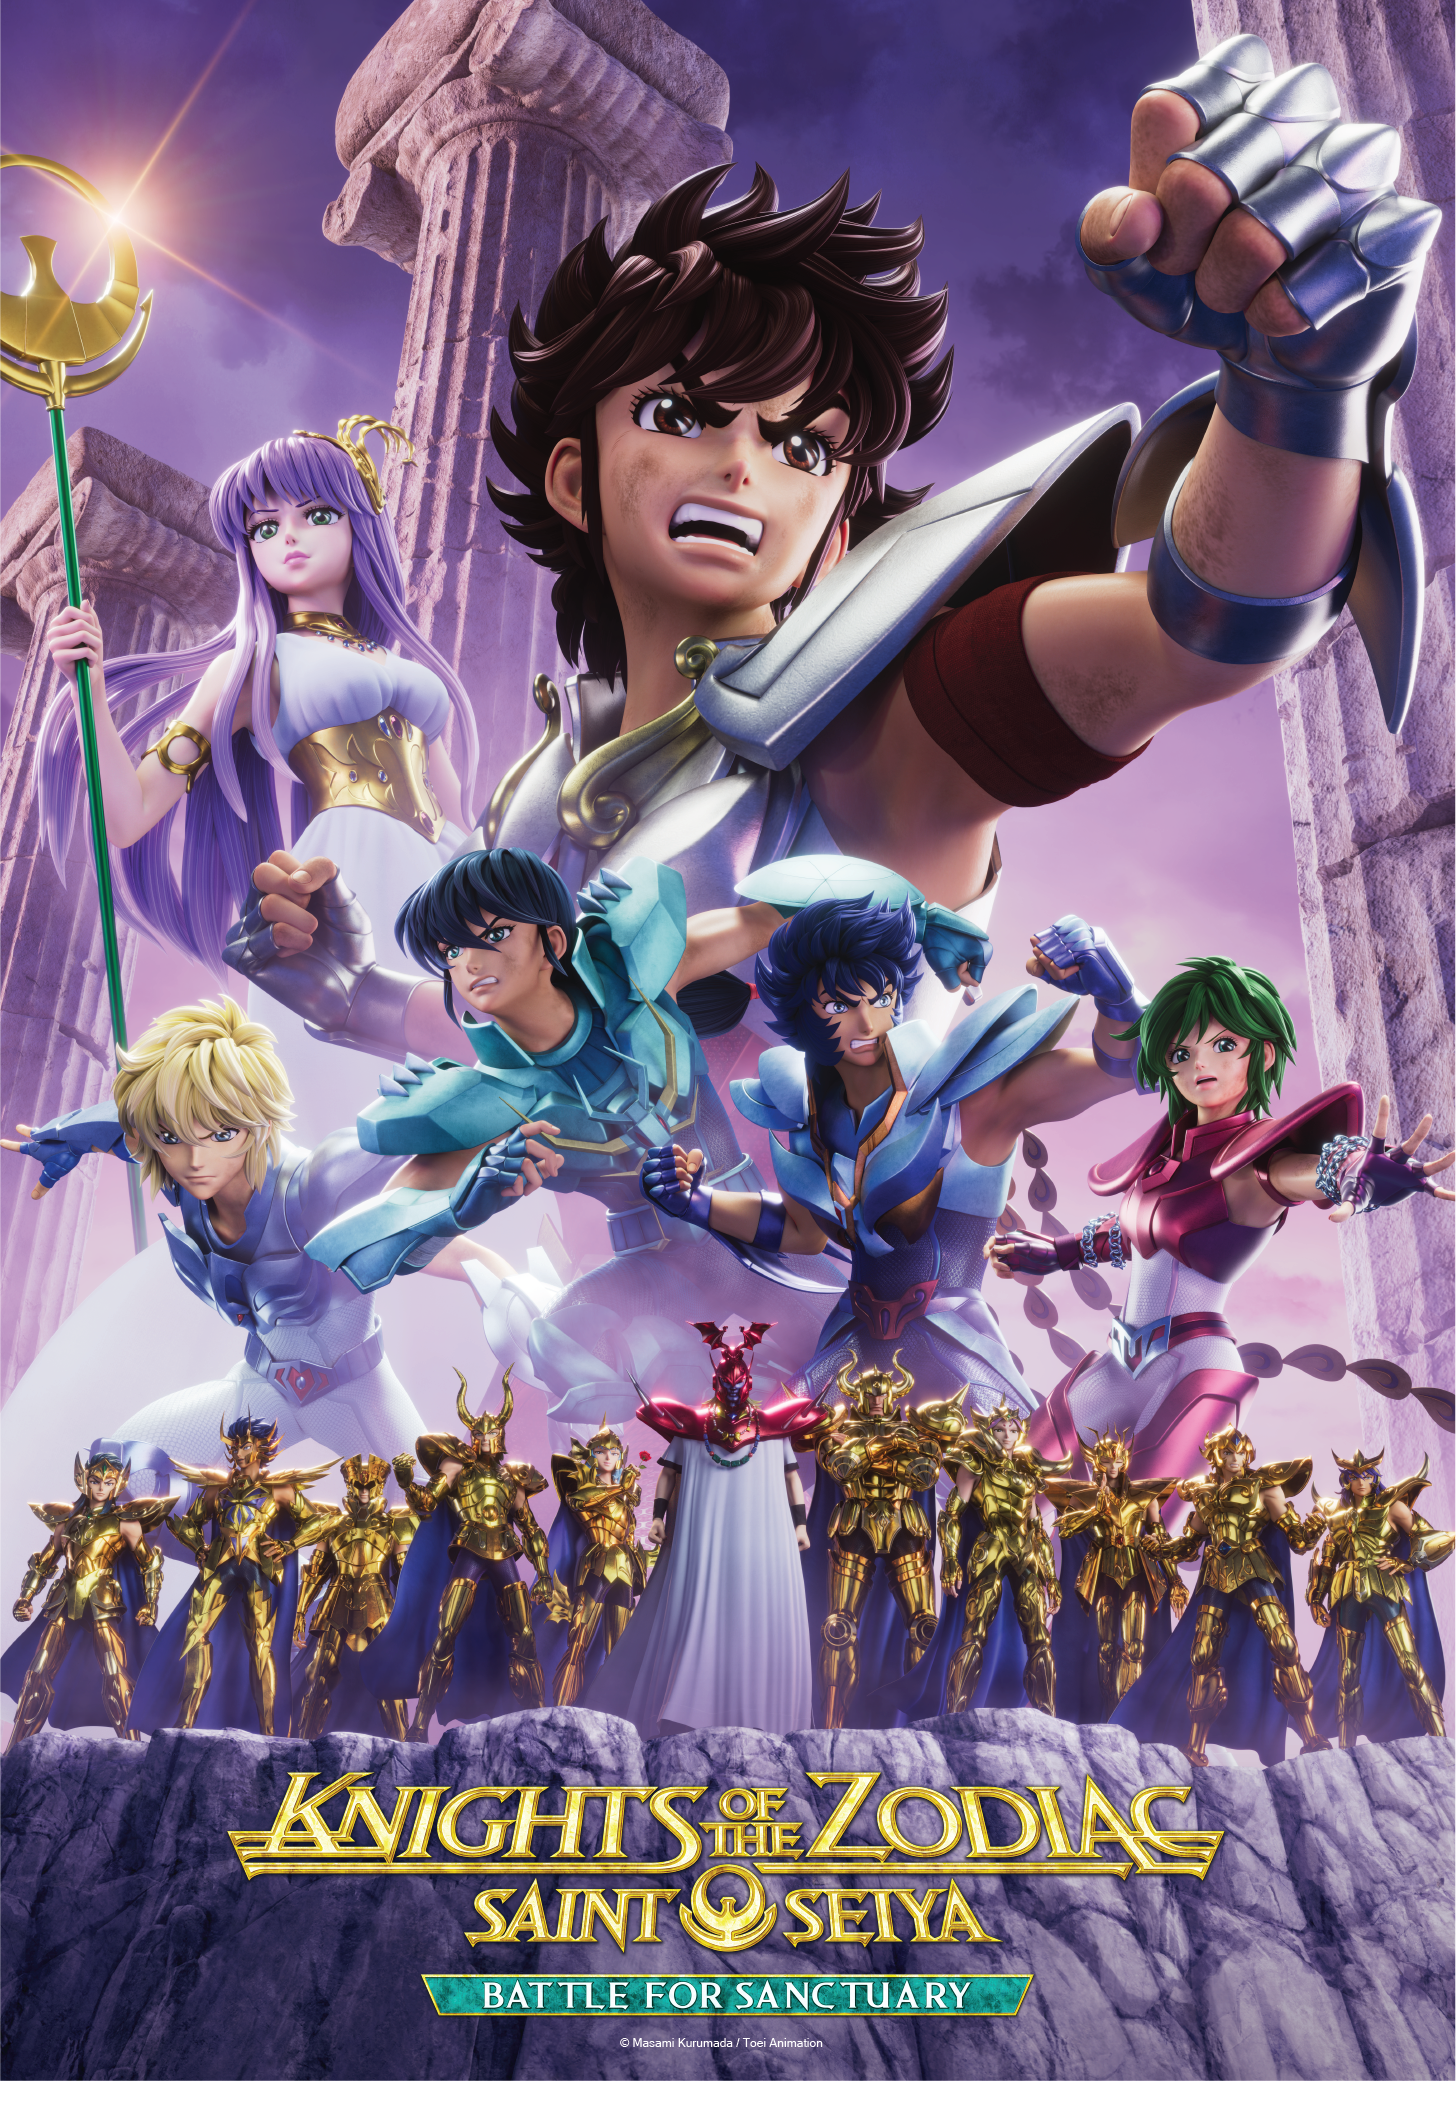 This summer, two international streaming giants 
Crunchyroll and iQIYI are bringing 
the new seasons of Saint Seiya: Knights of the Zodiac